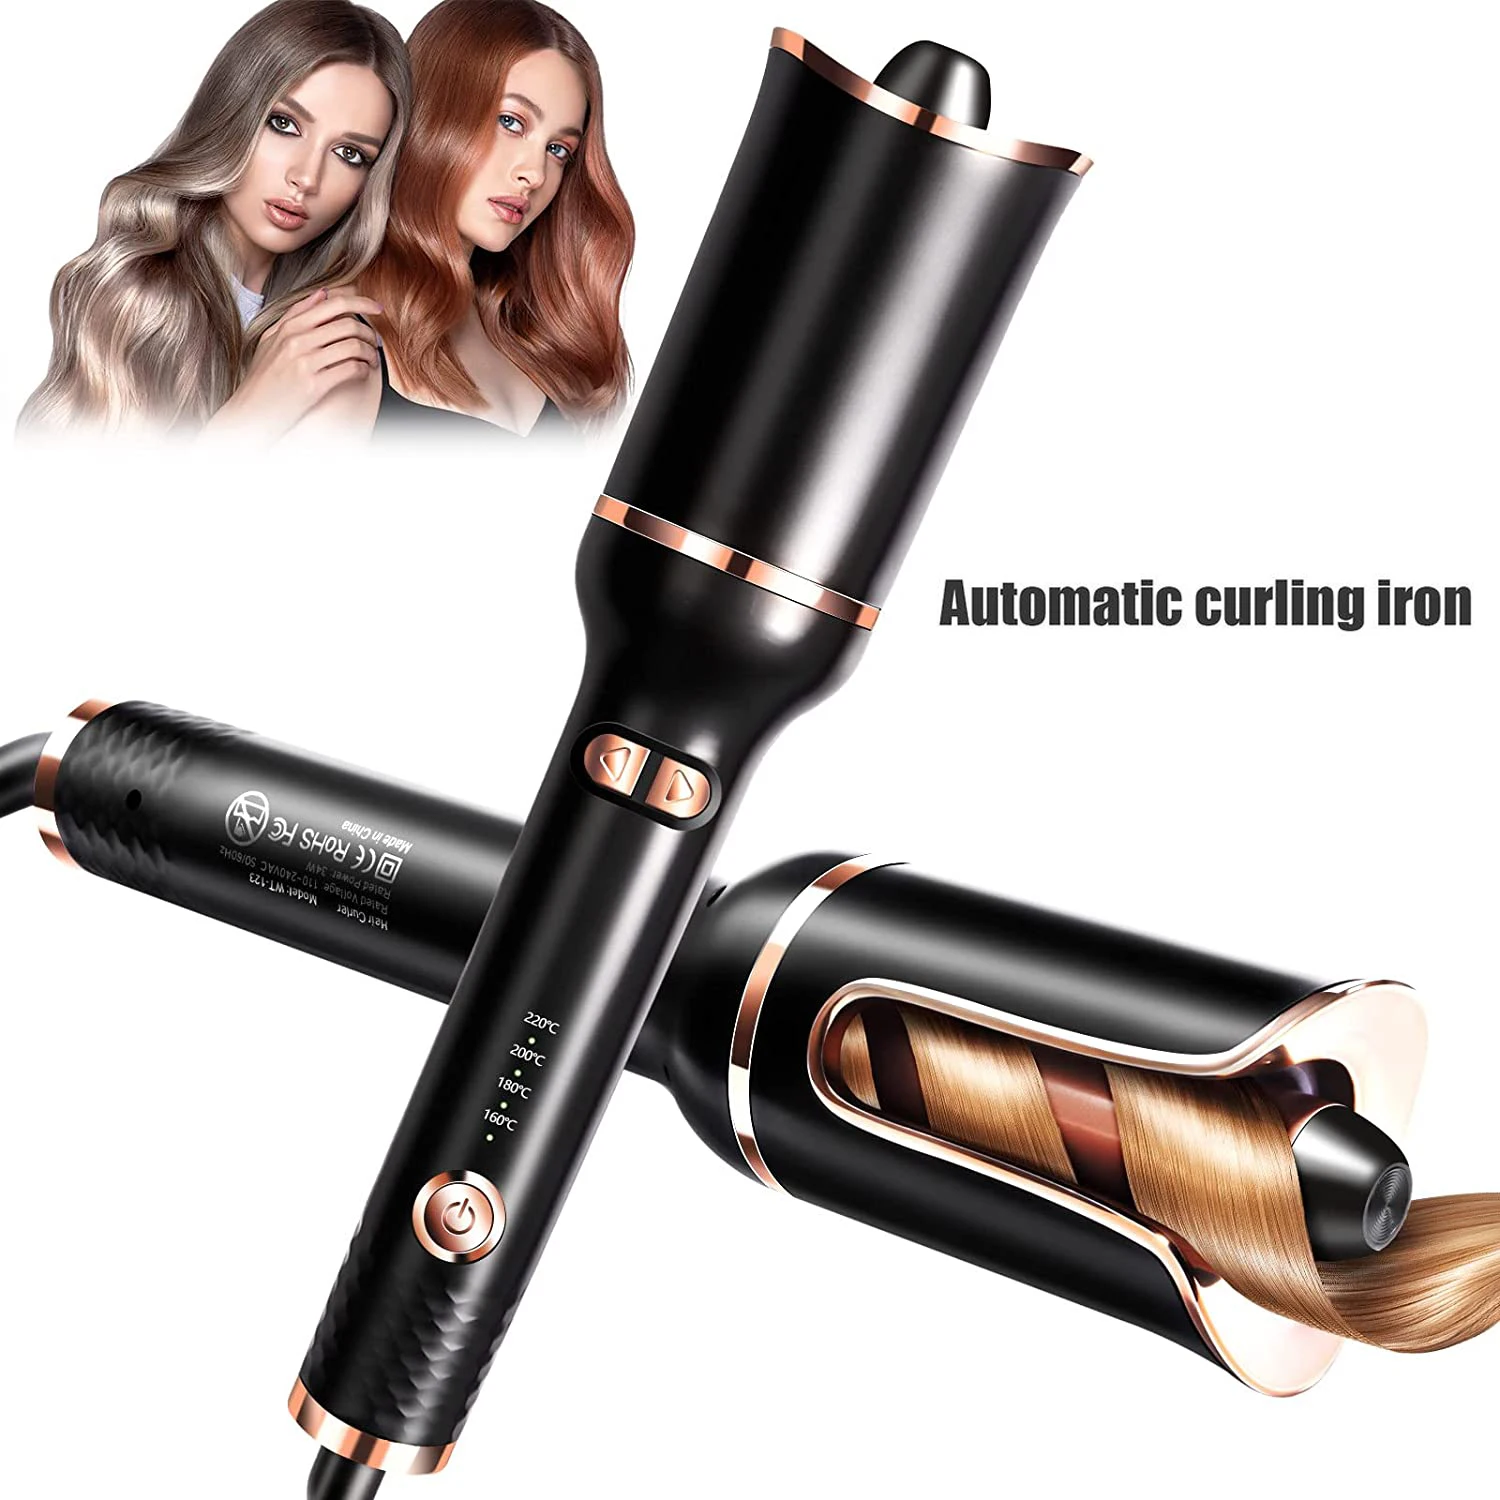 

Auto Rotating Hair Curler Rollers Automatic Curling Iron Crimp Ceramic Hair Waver Magic Curling Wand Air Spin and Curl Styler